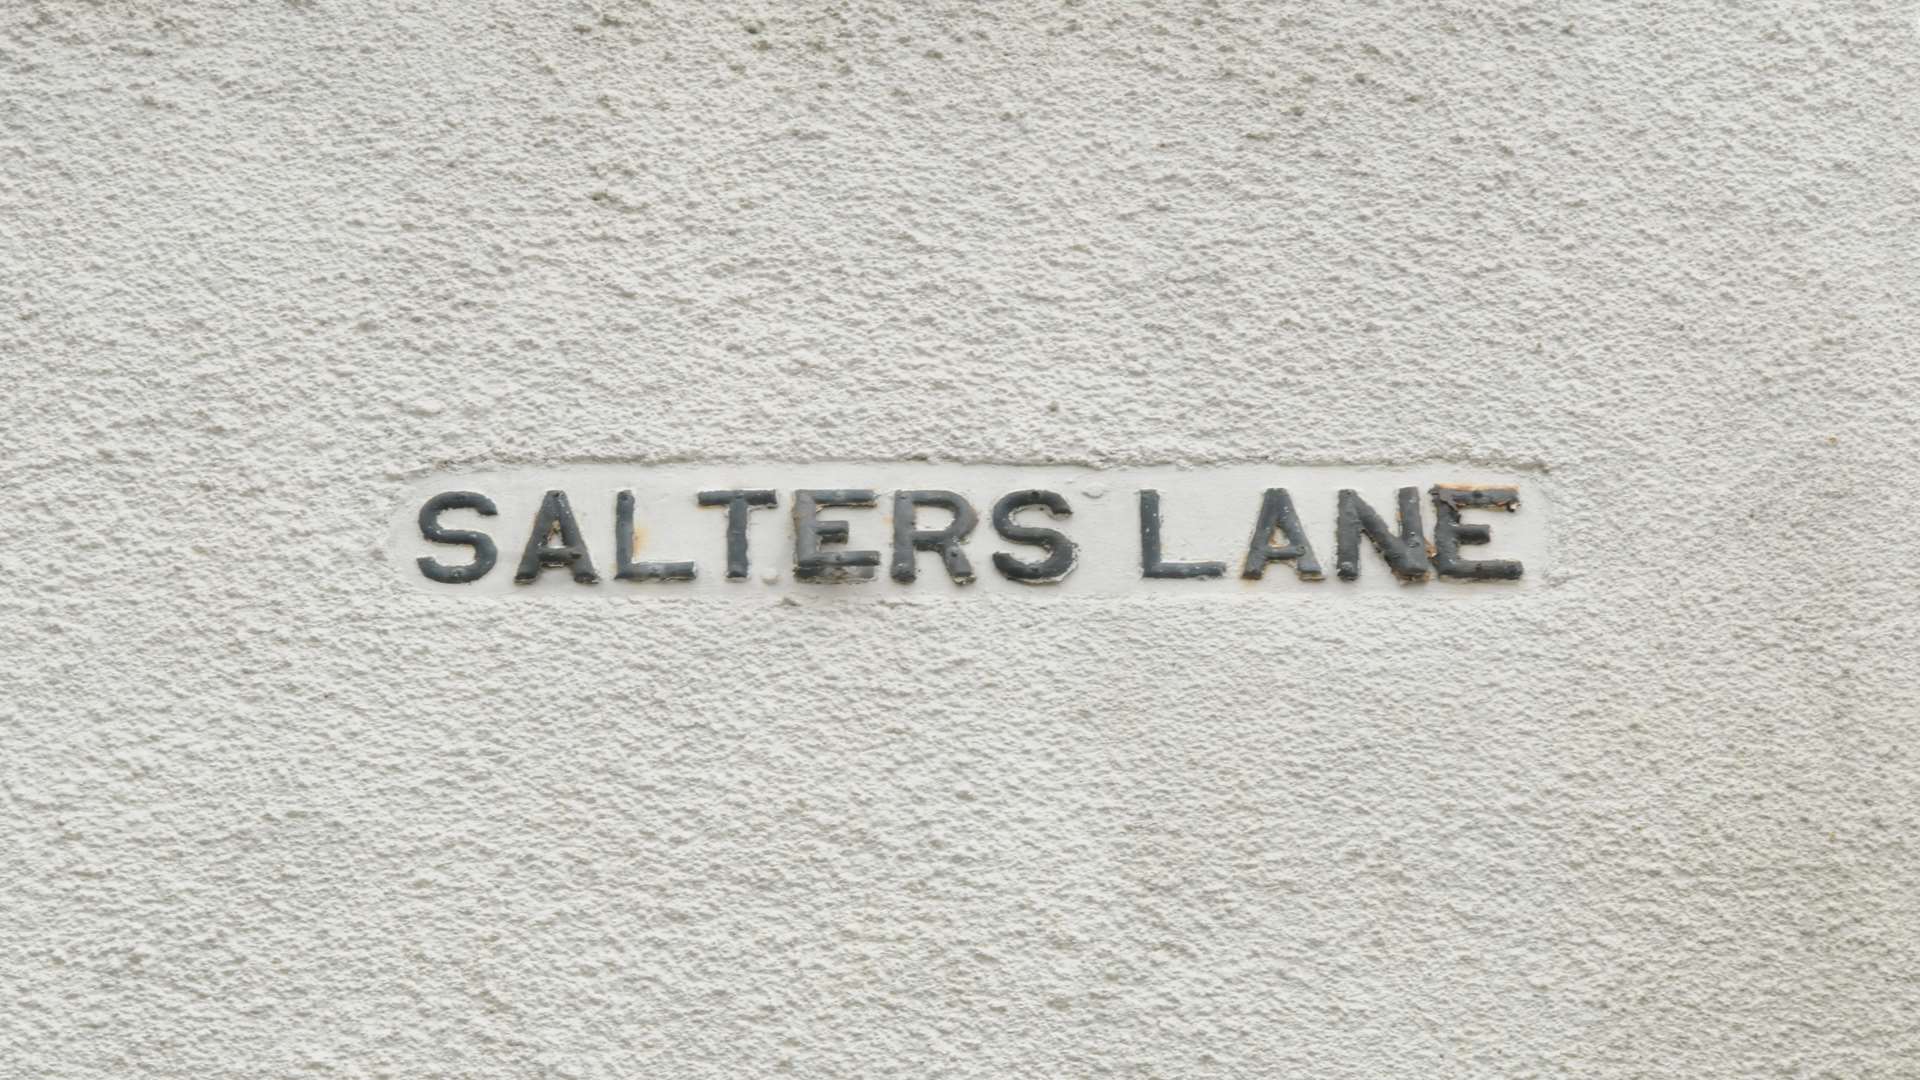 Salters Lane where the incident took place